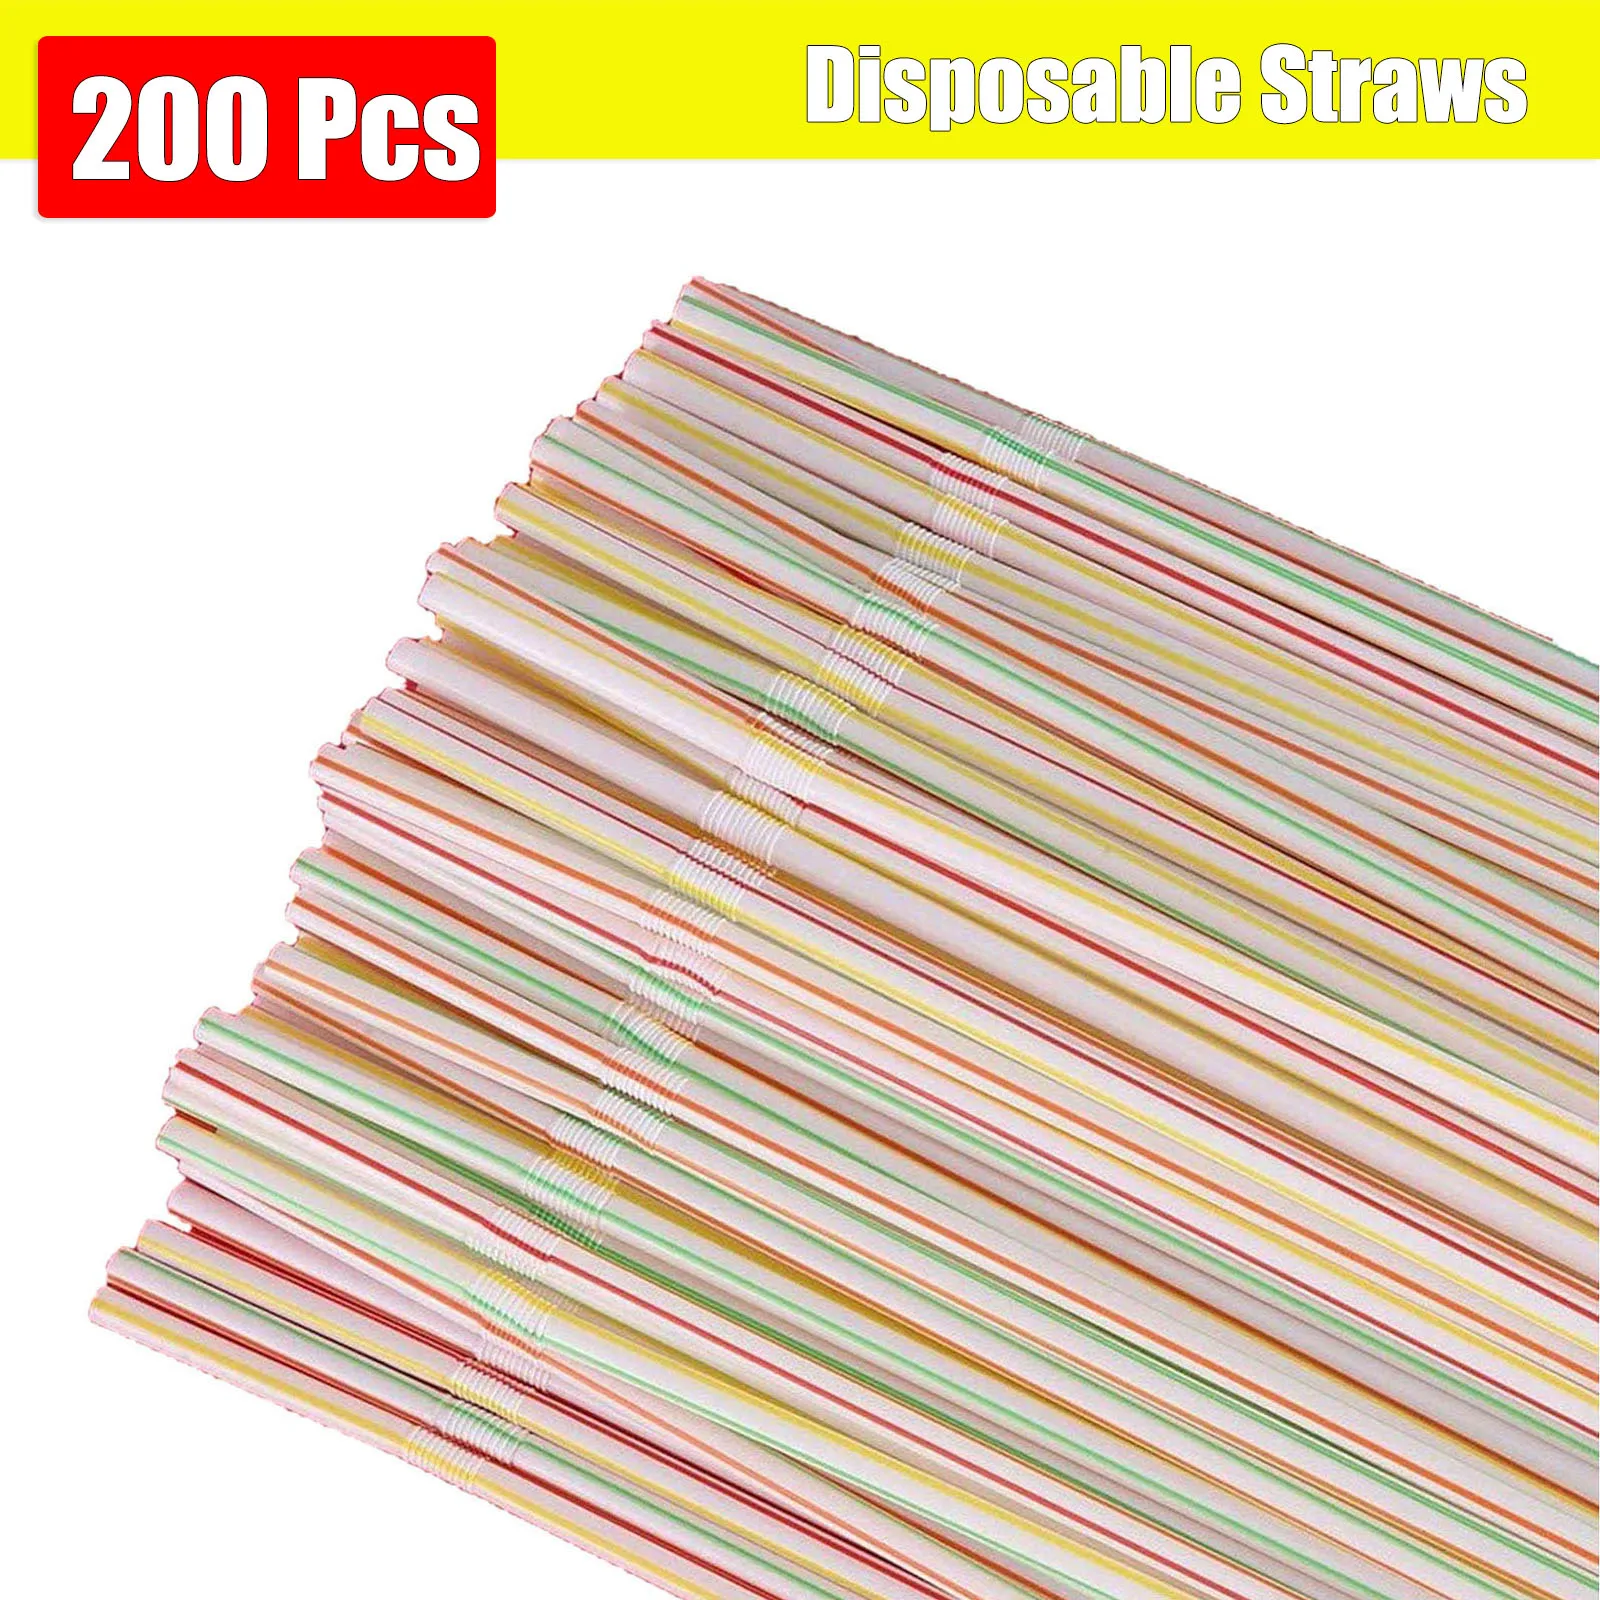 

200 Pcs Multi-Colored Disposable Plastic Drinking Straws Birthday Party Wedding Kitchenware Bar Drink Accessories Colorful Straw